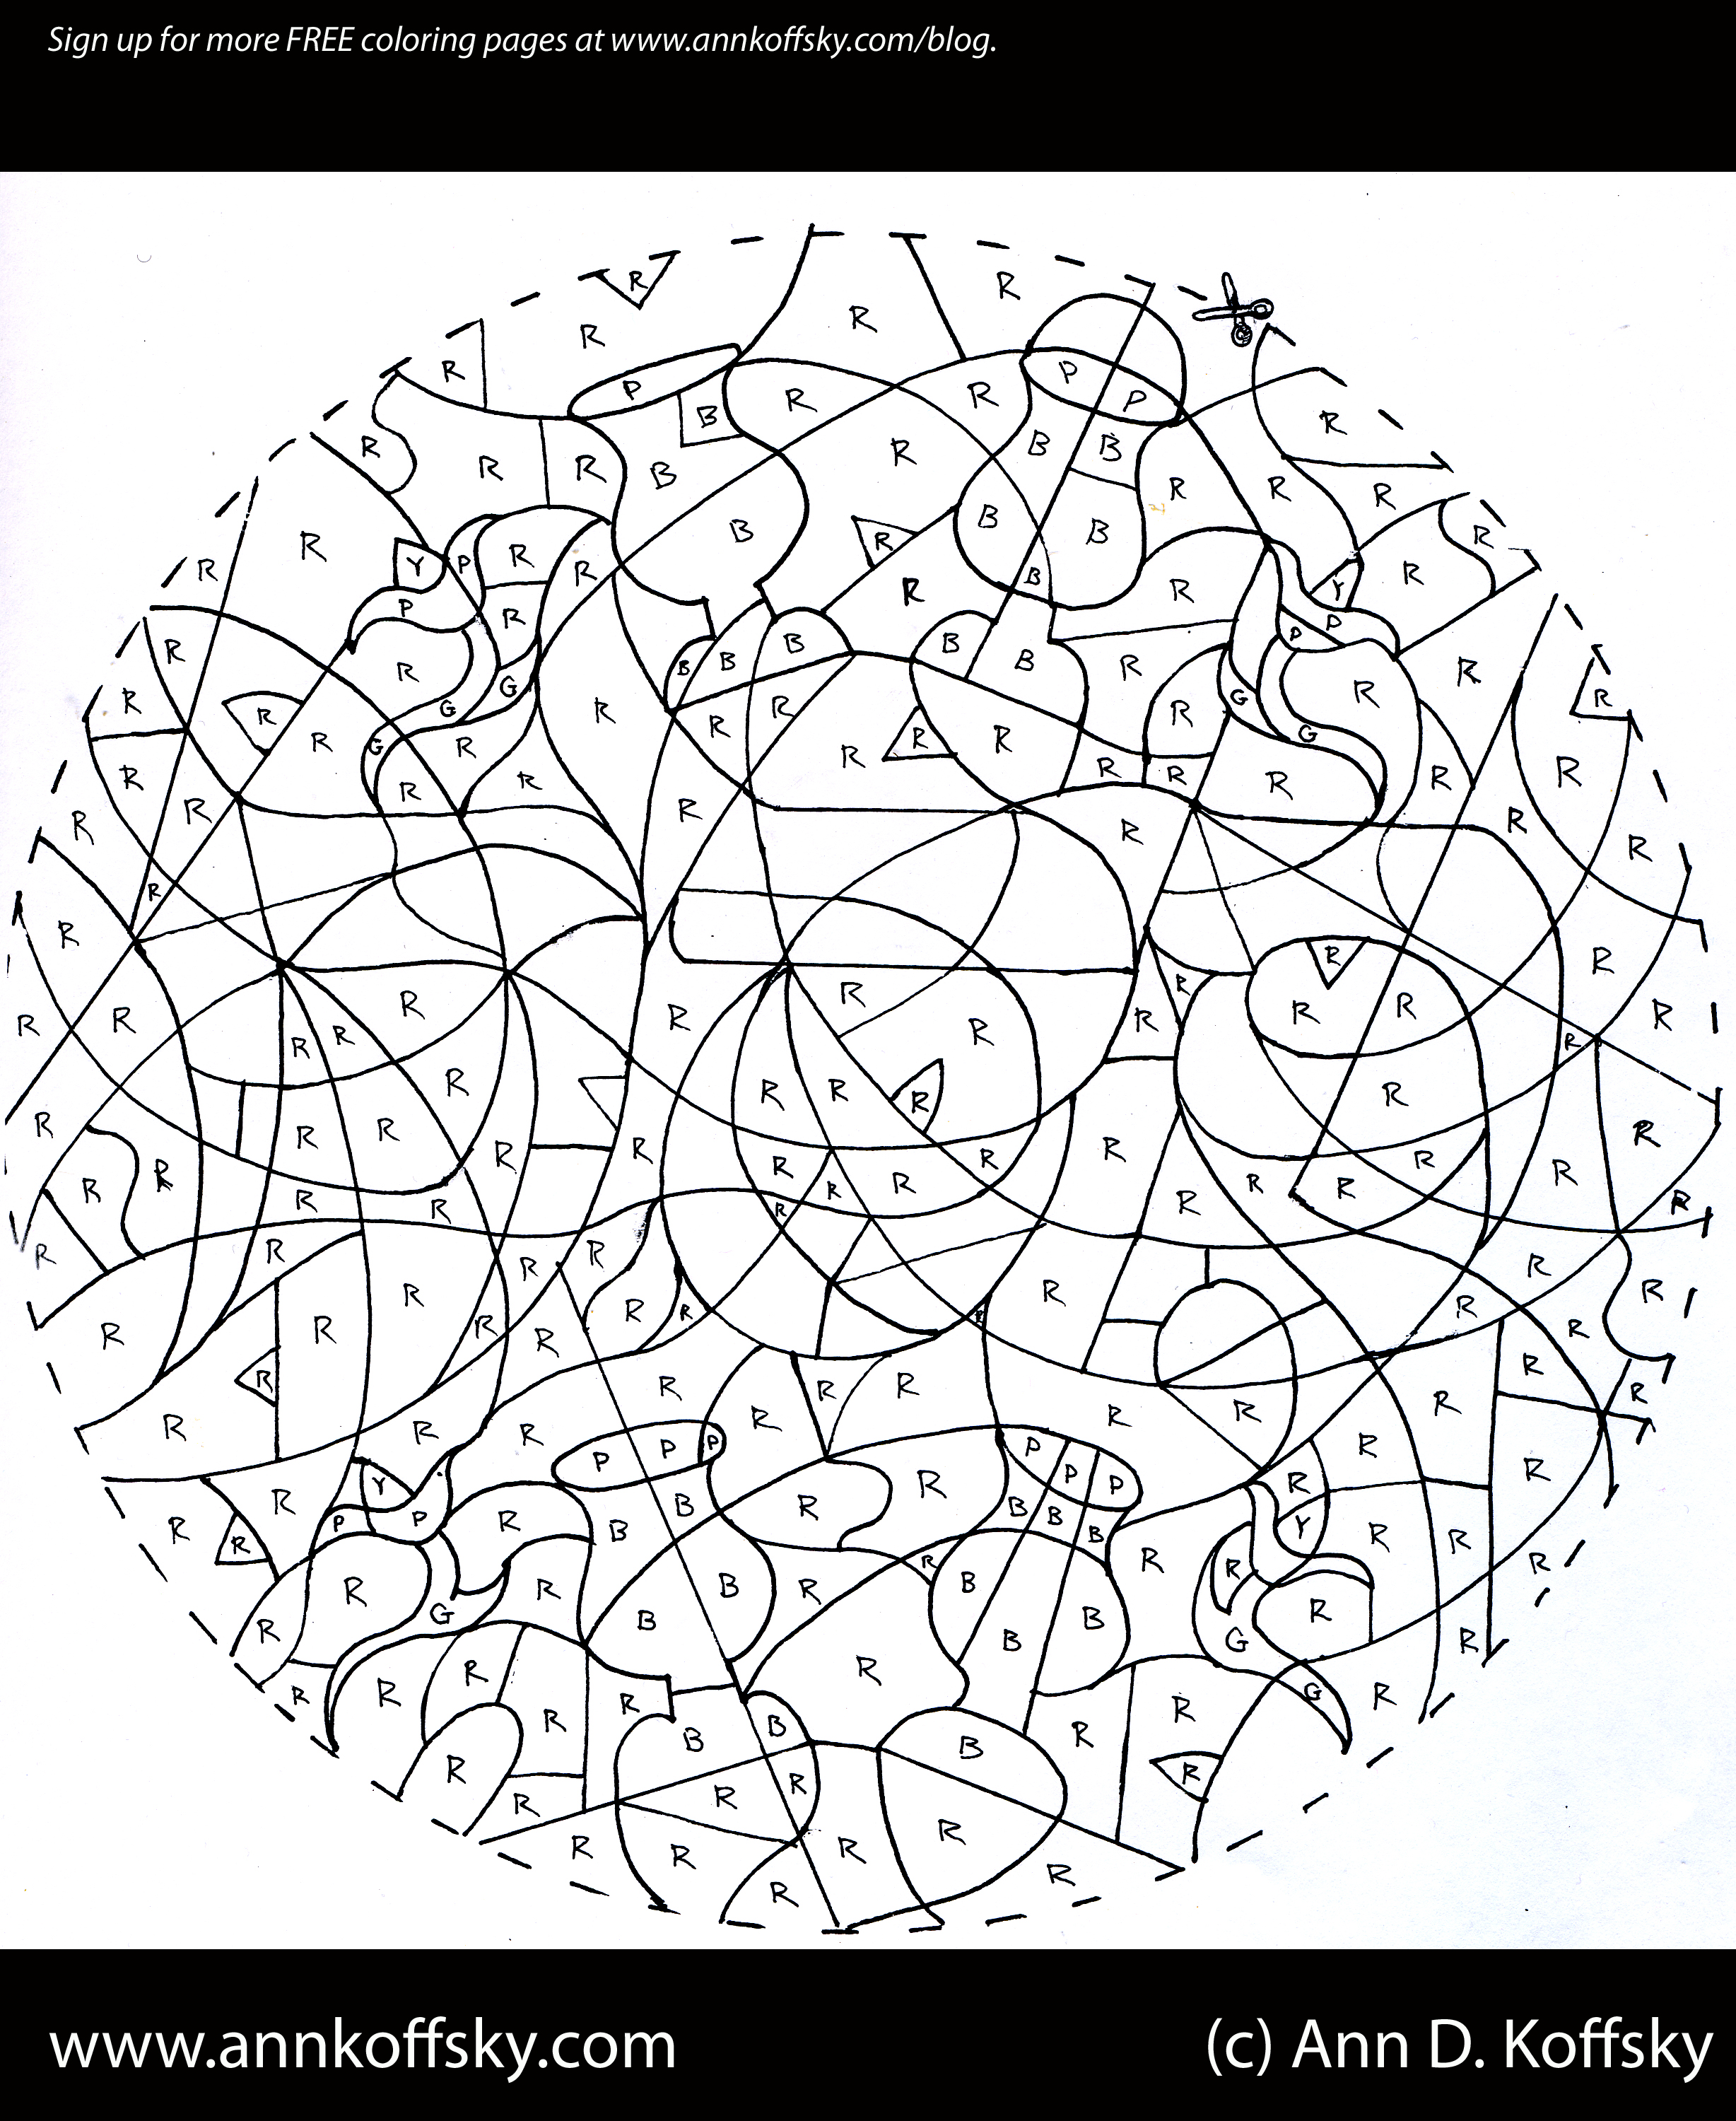 Passover Coloring Page #2 | Ann D. Koffsky